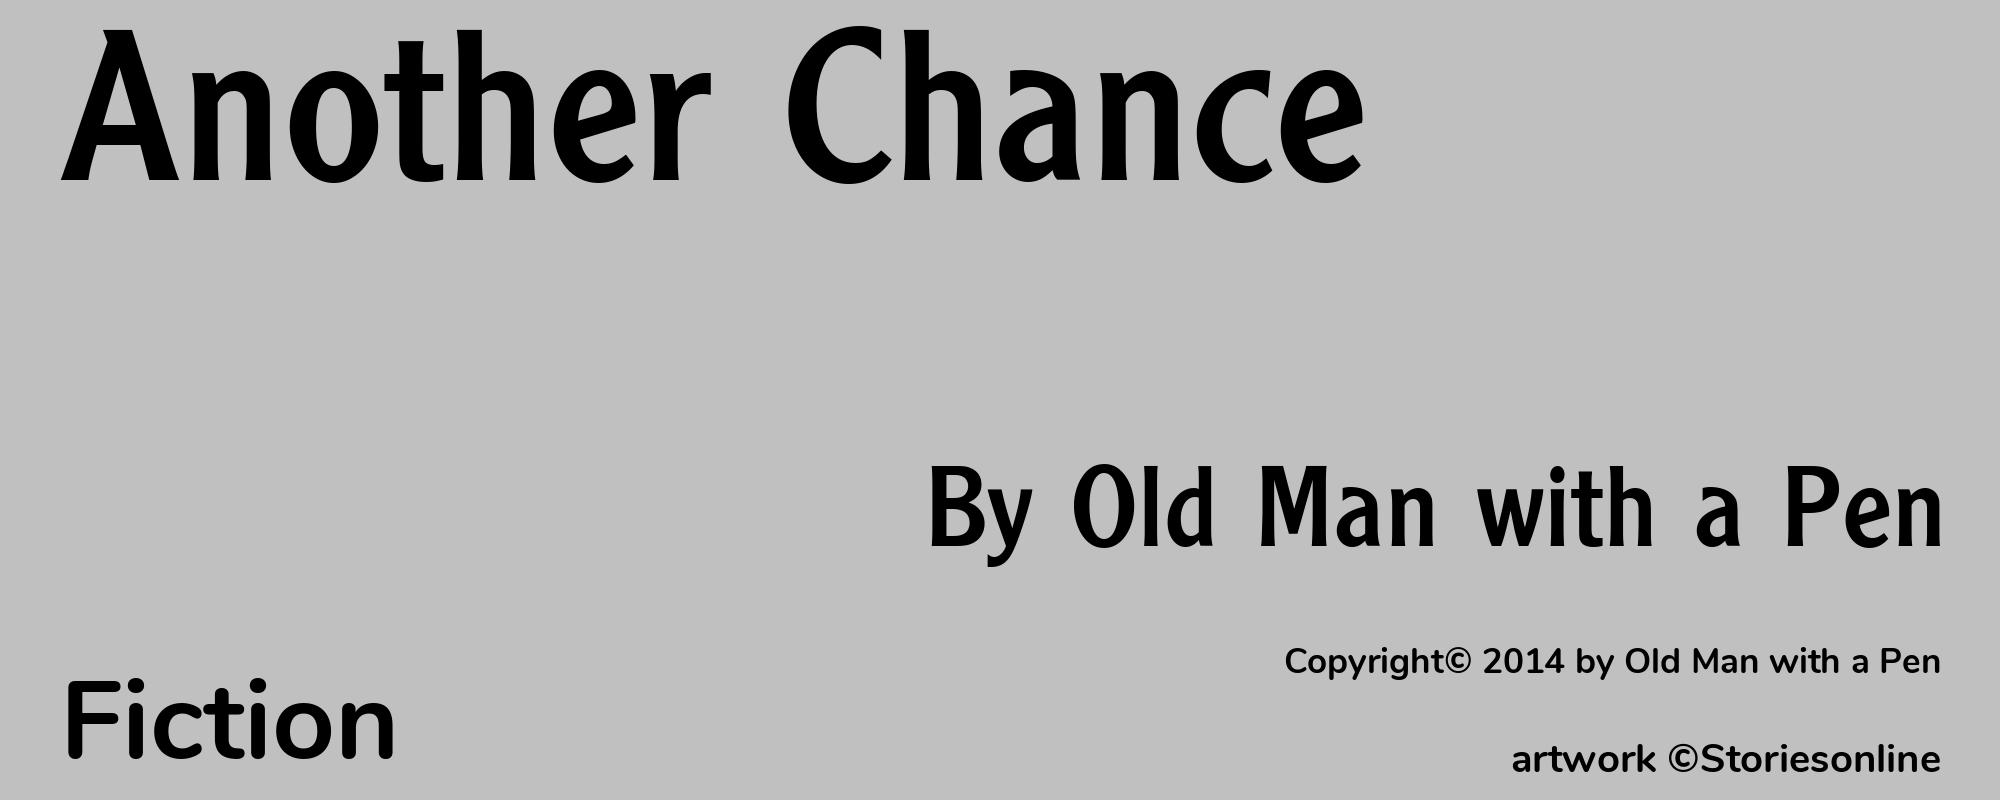 Another Chance - Cover